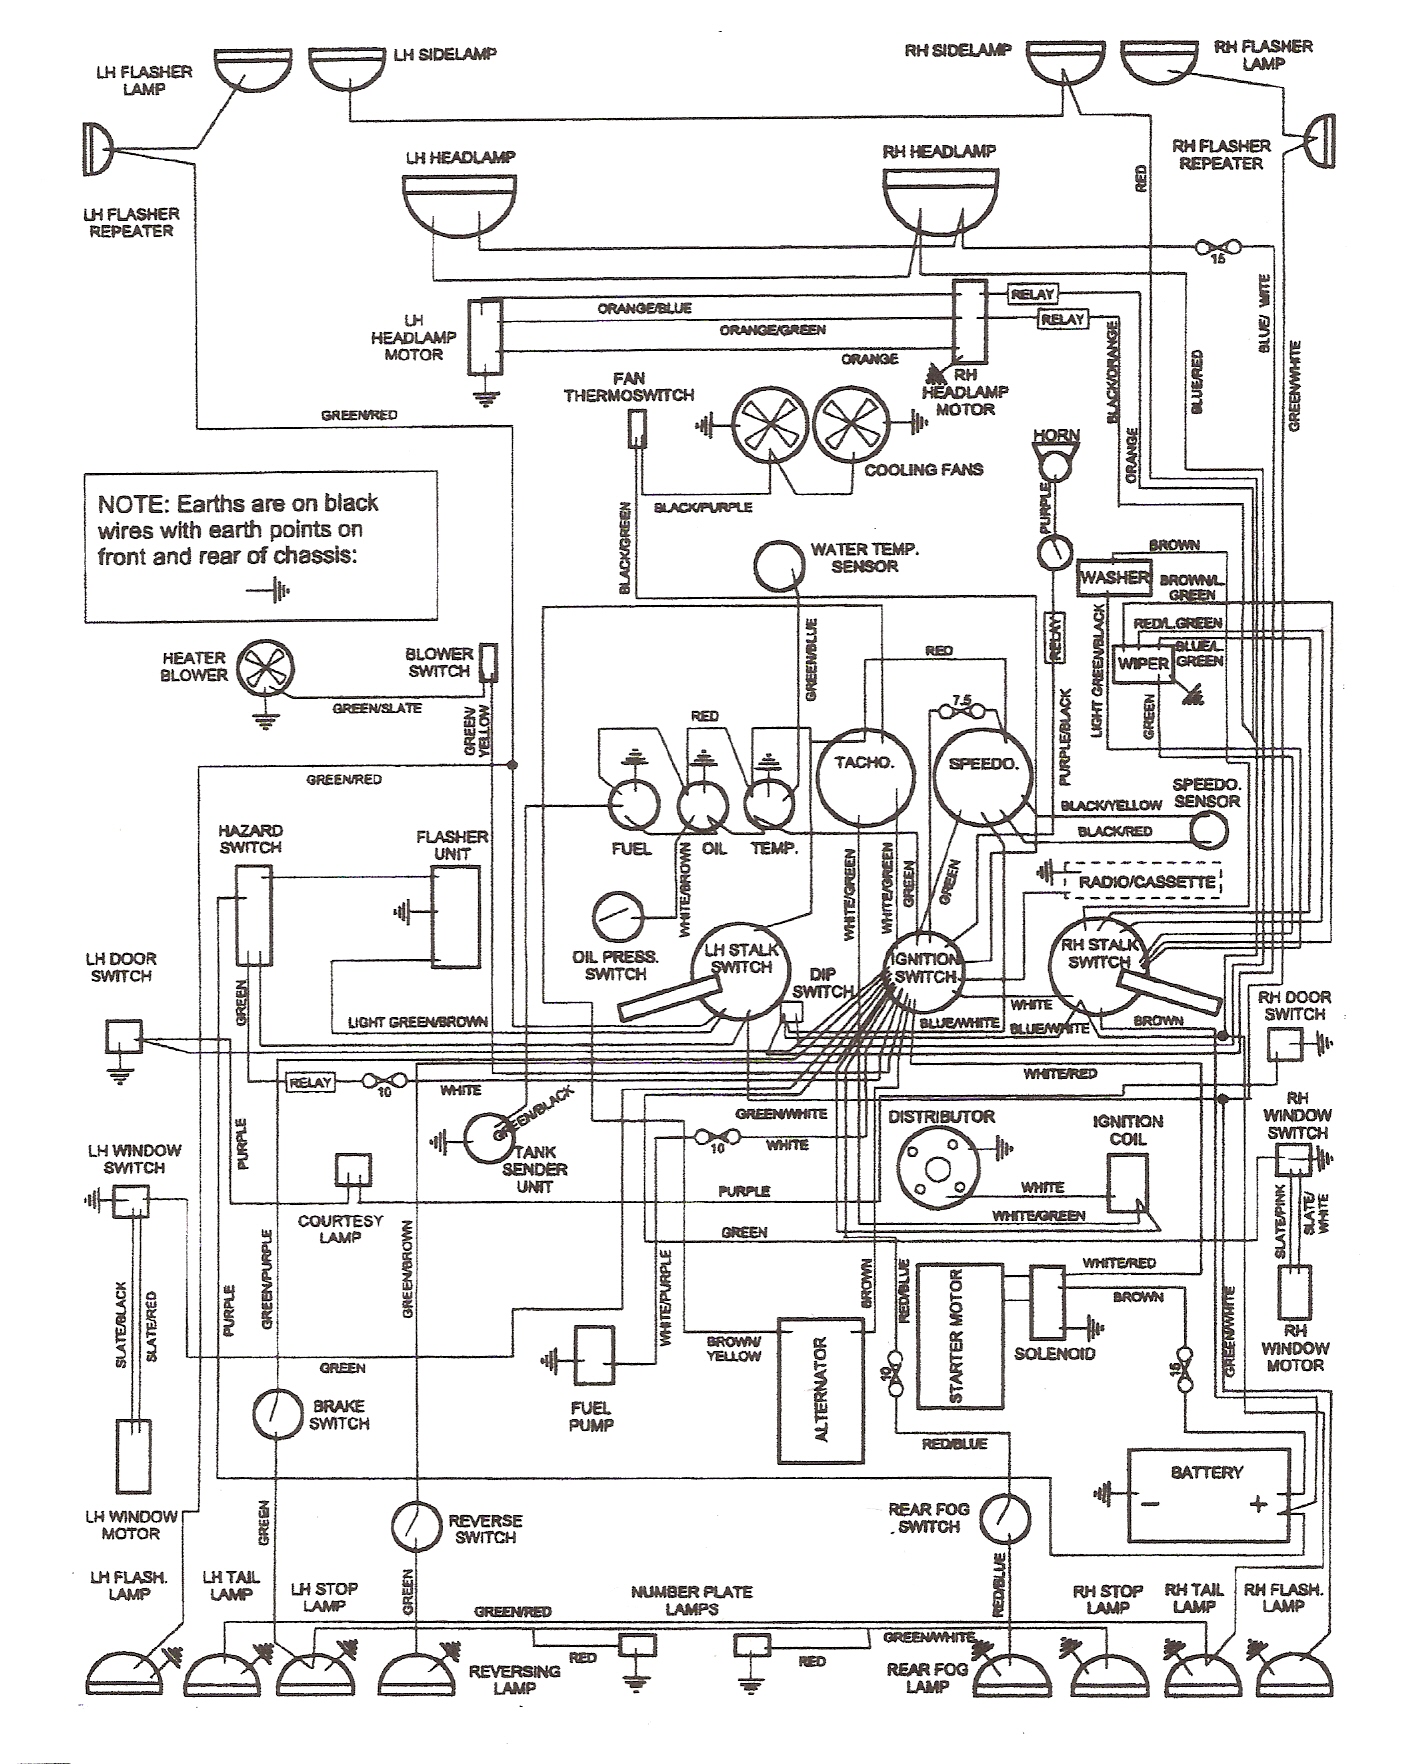 General wiring diagram for the Automilan 308 GTS Replica kitcar